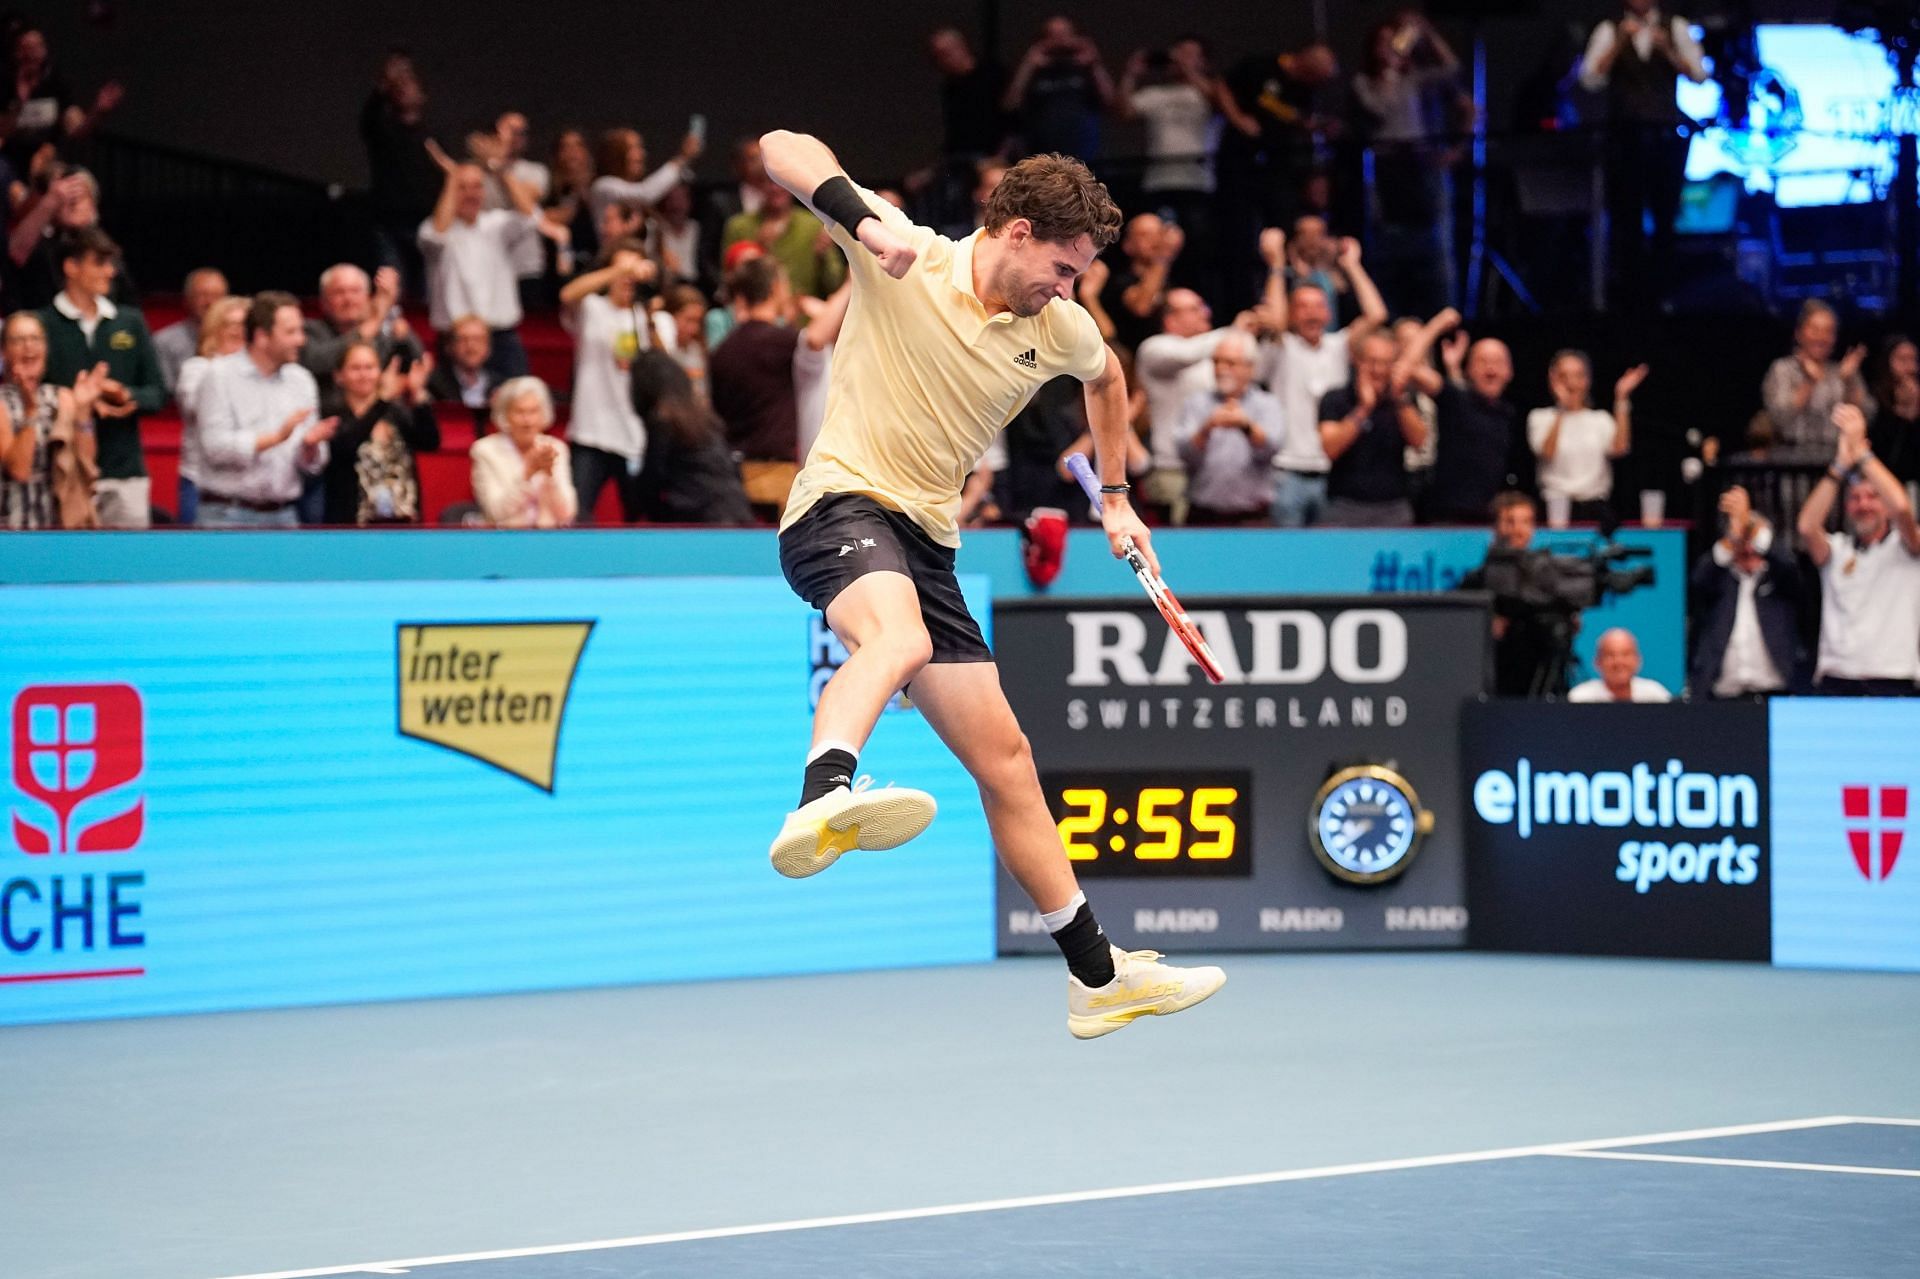 An ecstatic Dominic Thiem does a celebratory jump following his Vienna Open first round victory. (Photo courtesy of Bildagentur Zolles of the Erste Bank Open 2022)